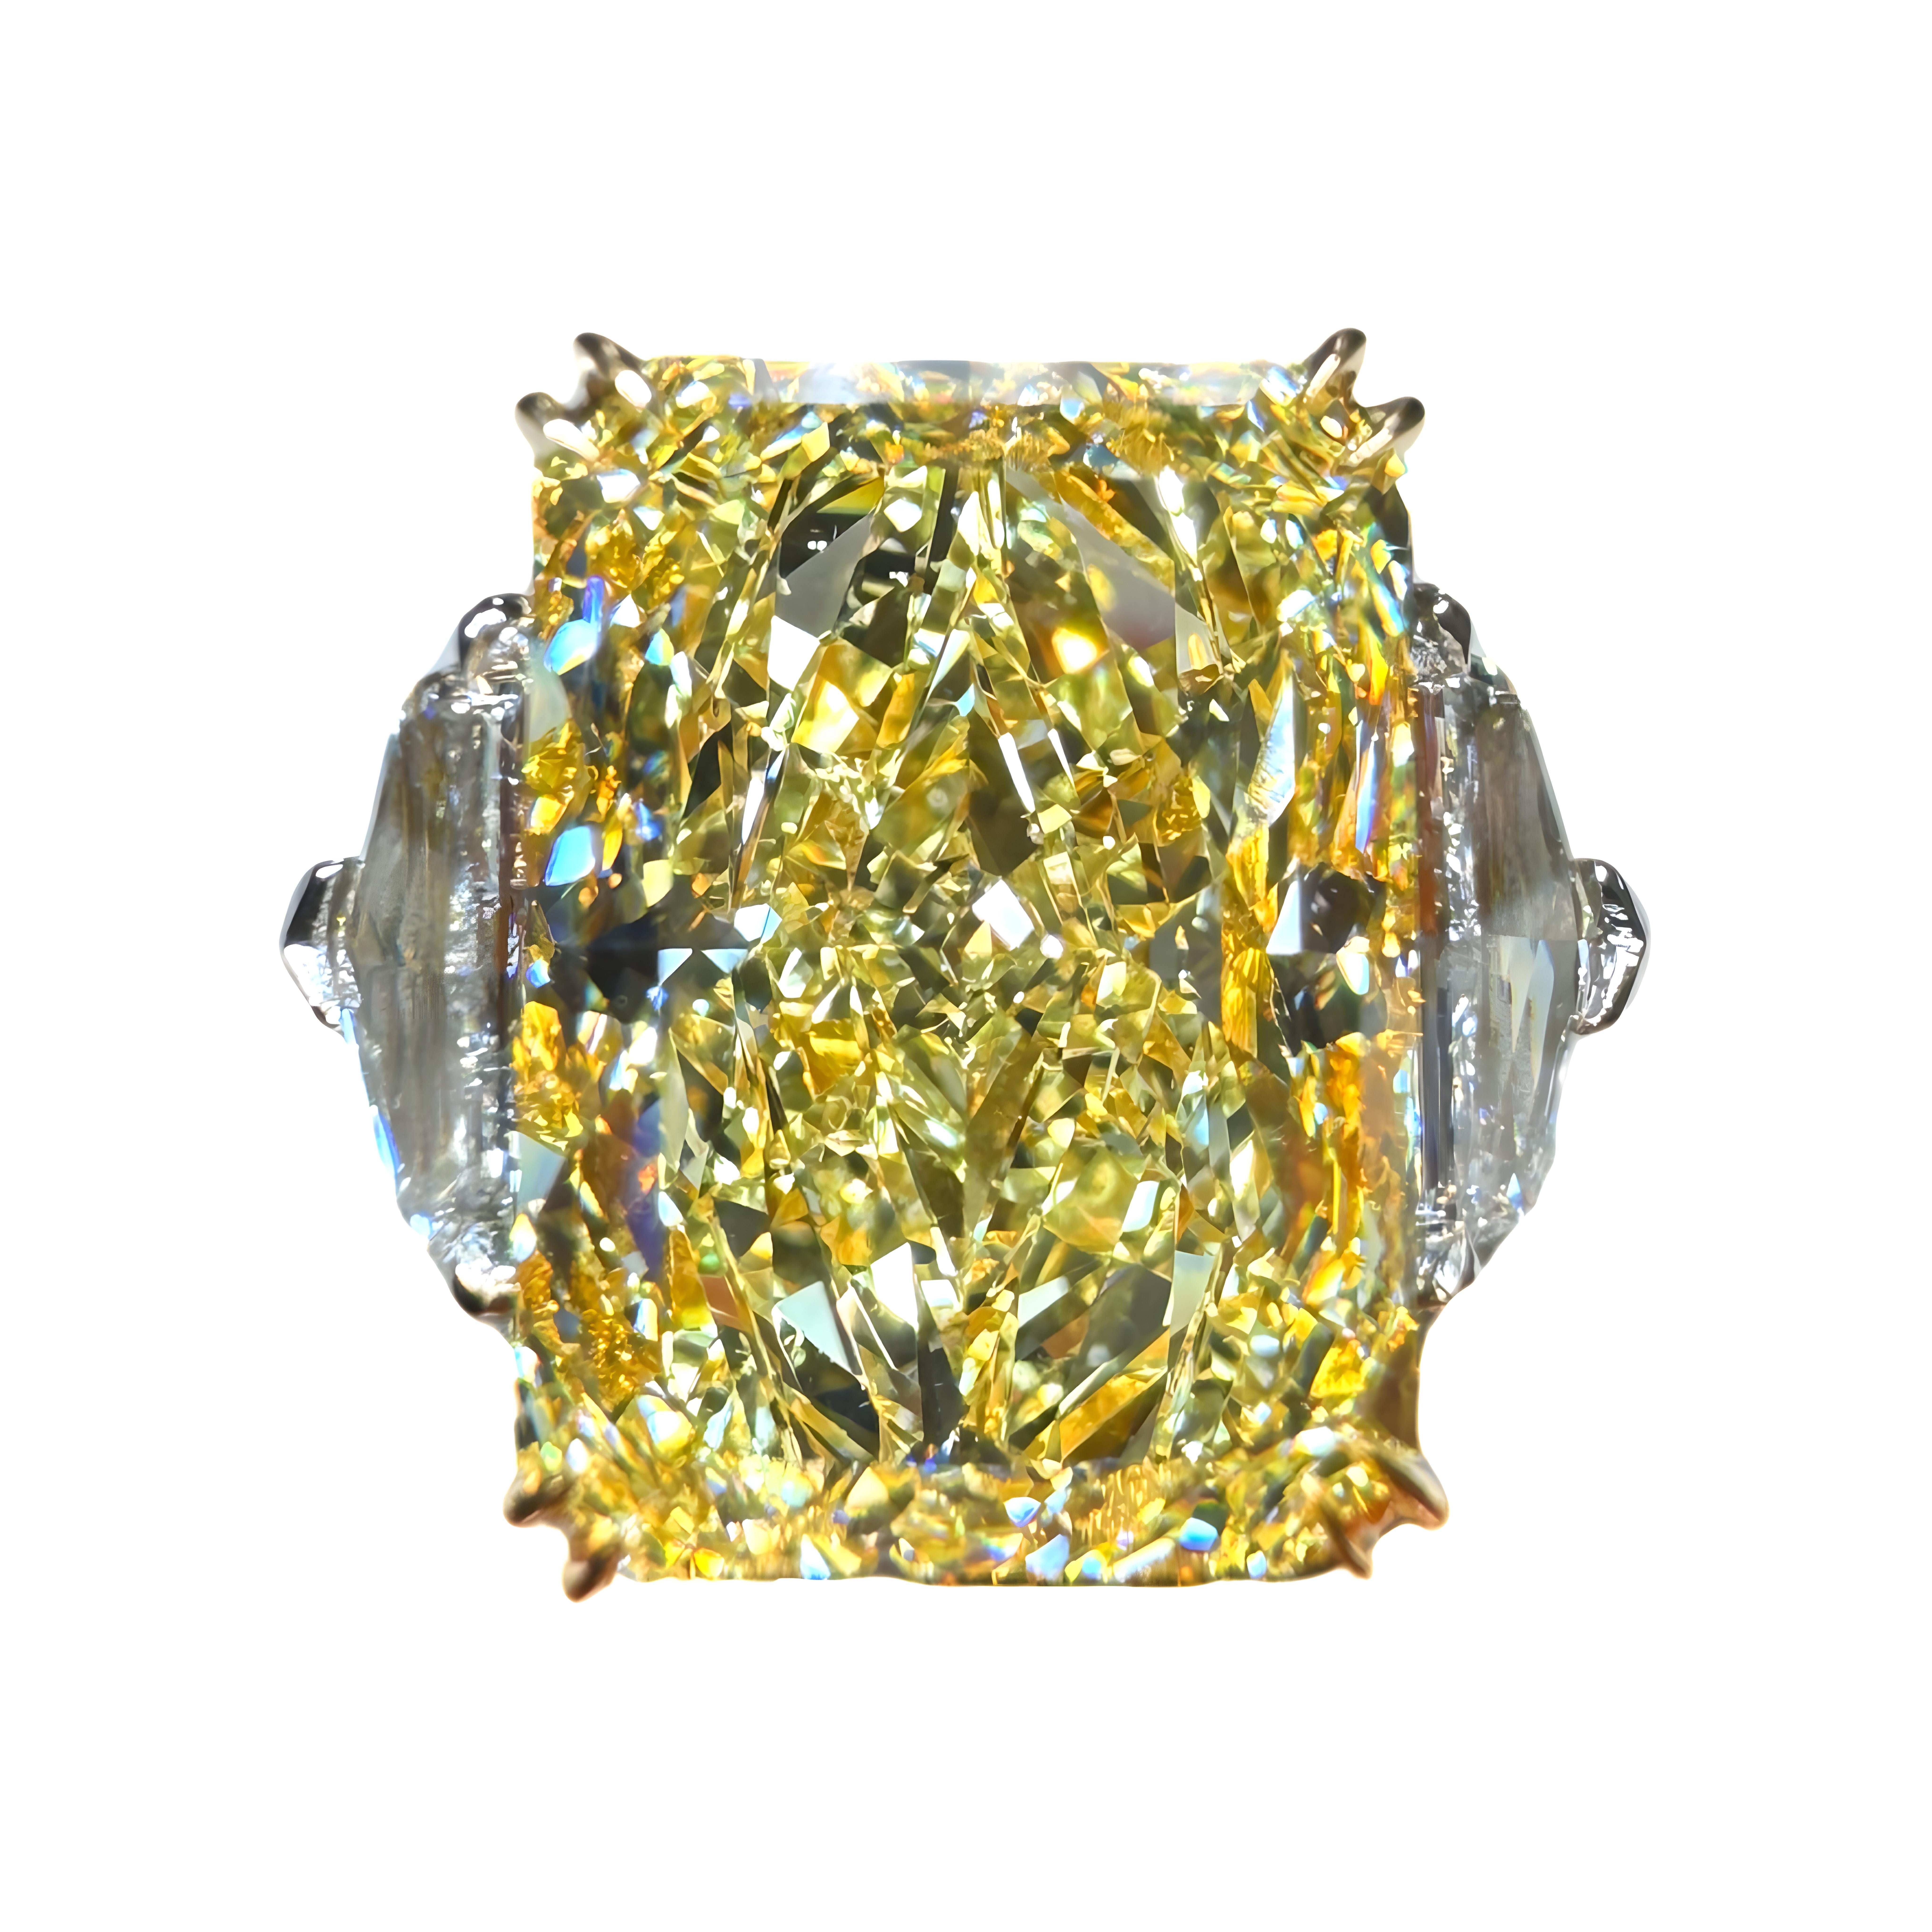 Amongst Yellow Diamonds, Elongated Shapes are the most coveted and desired outlines for Radiant Cuts.

A bold 8.01 Carat Rectangular Radiant Cut Natural 